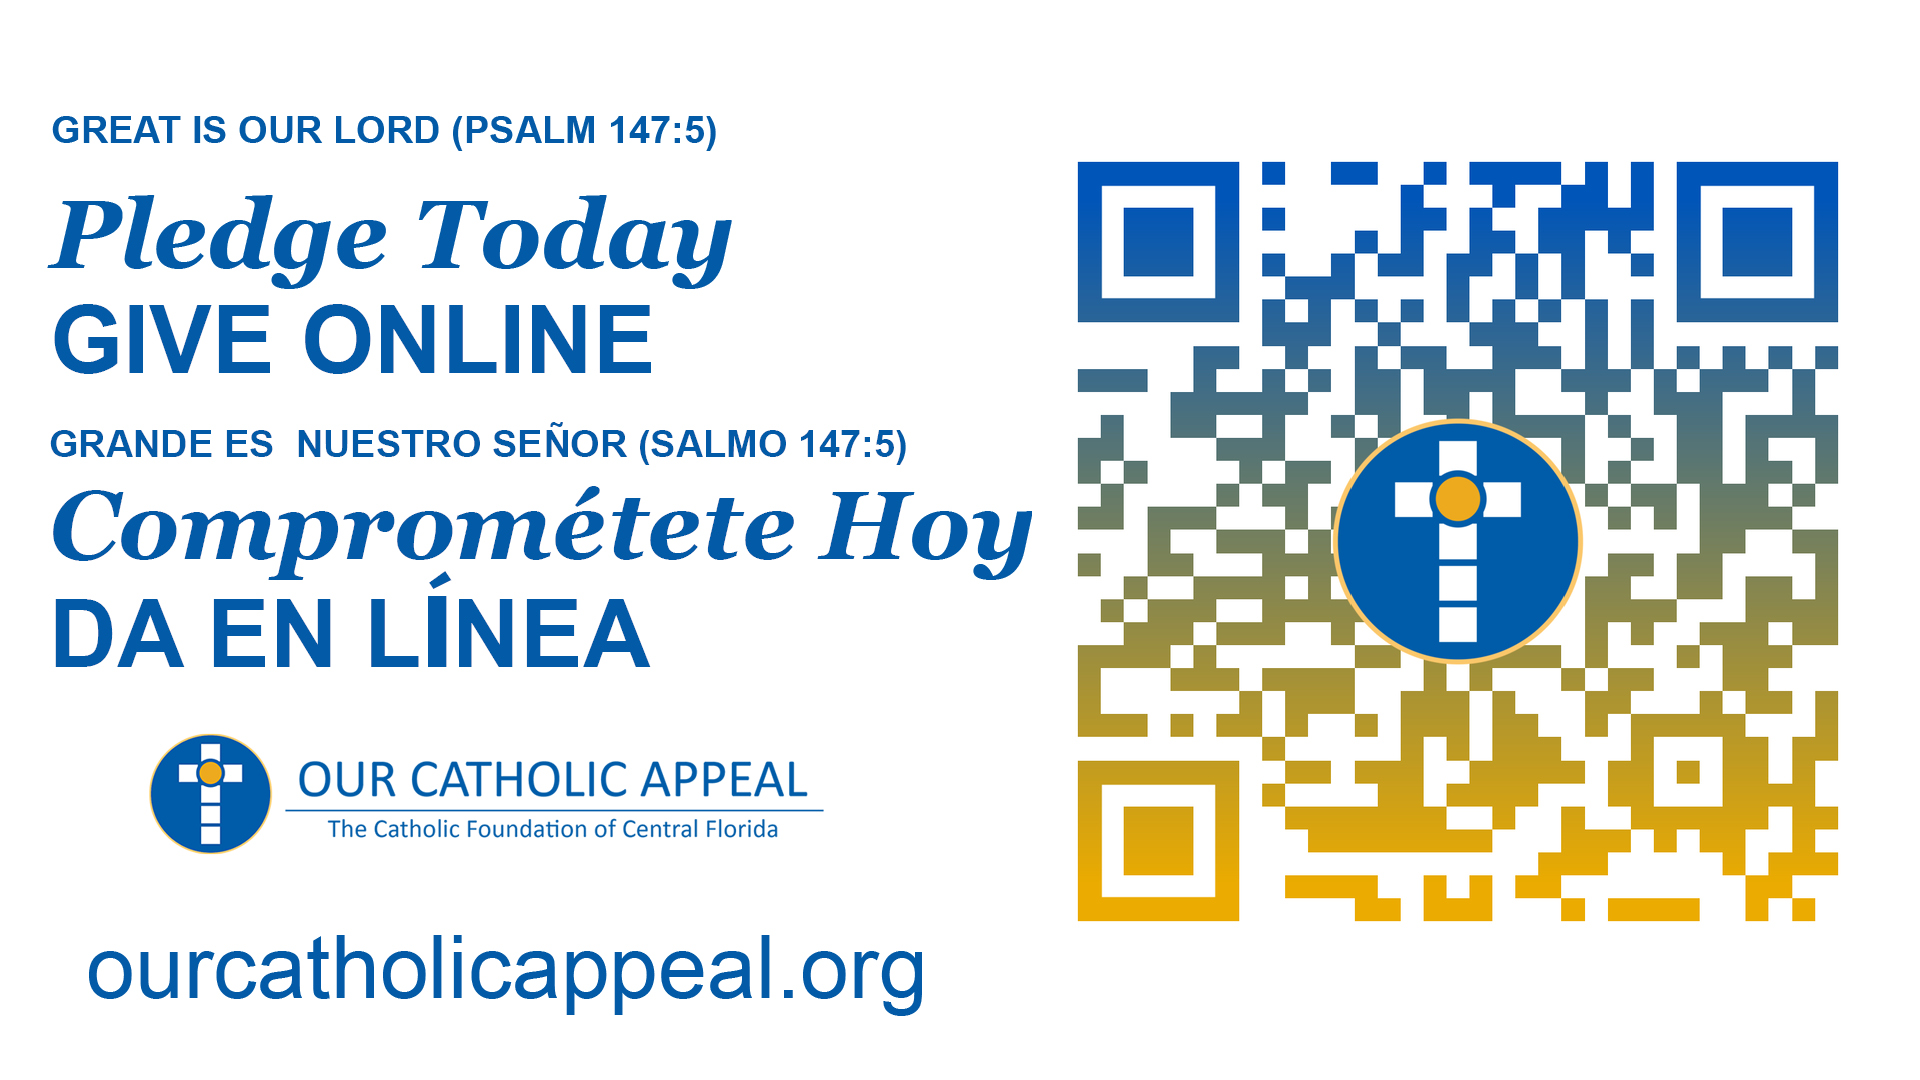 Our Catholic Appeal image header